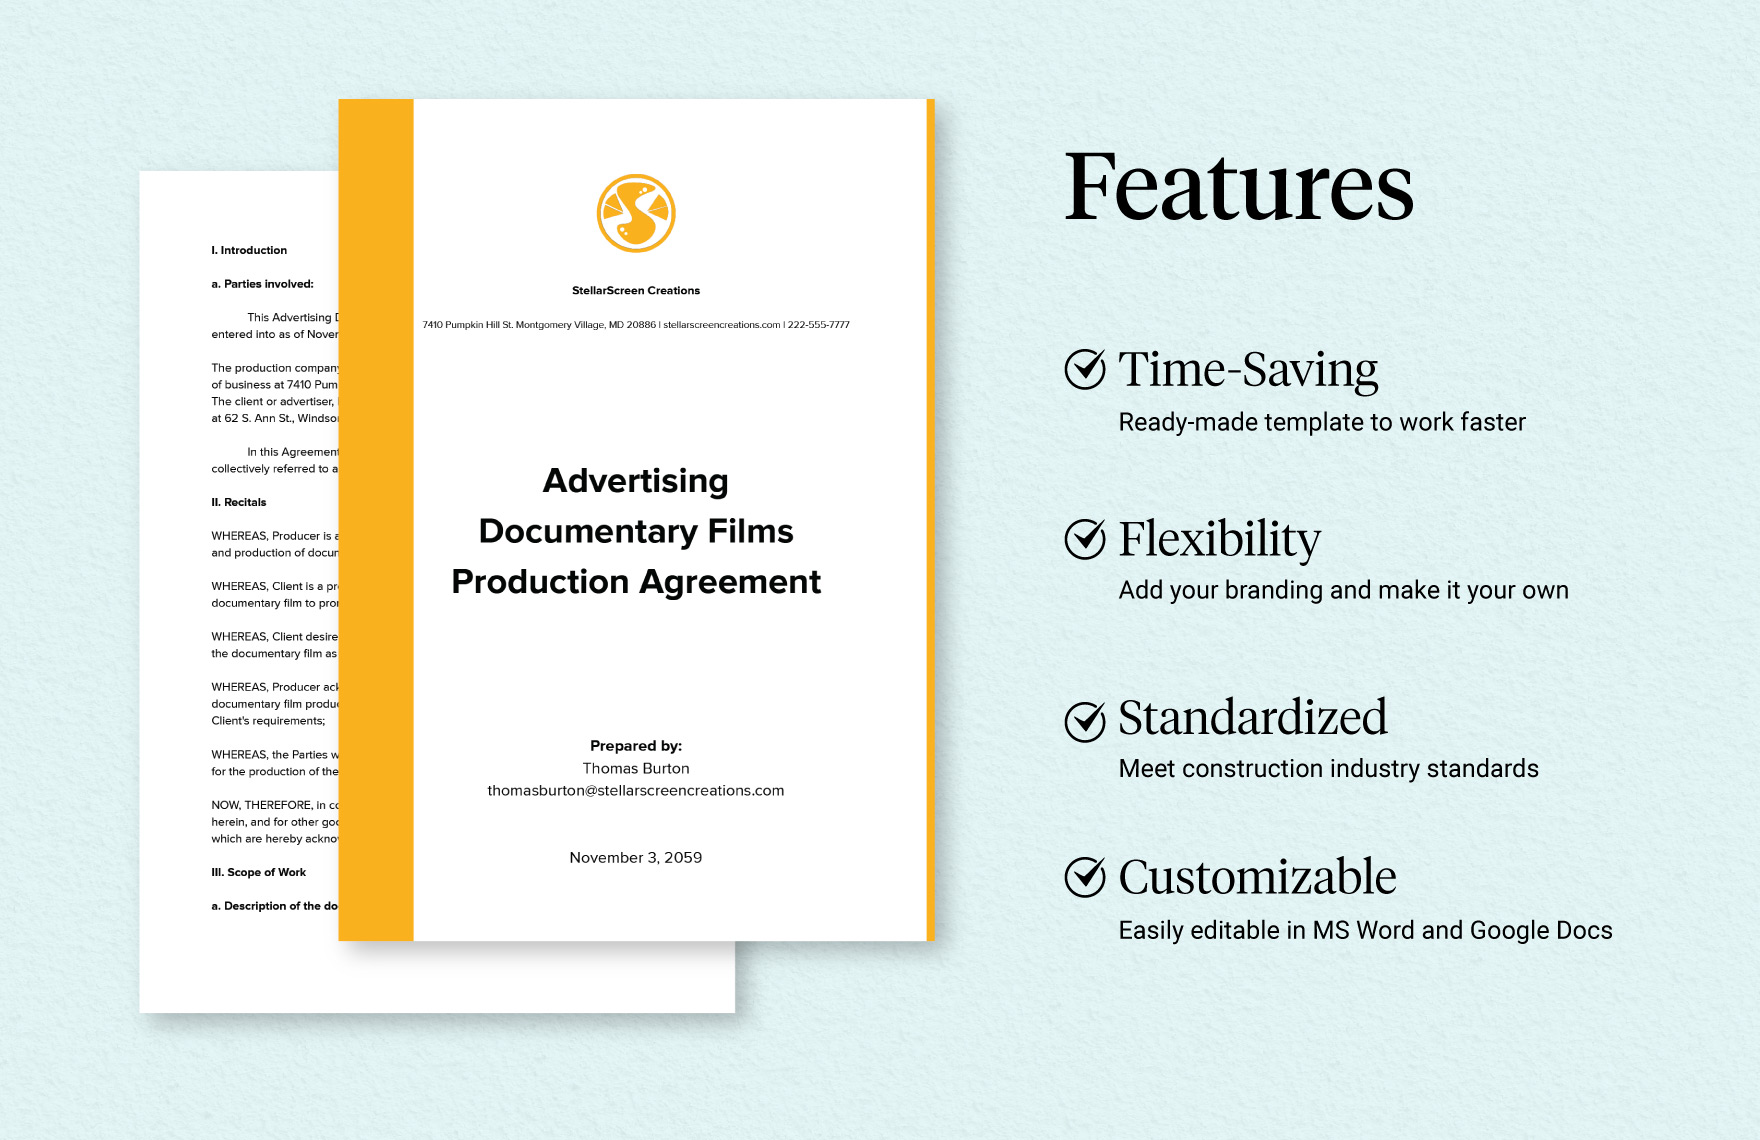 Advertising Documentary Films Production Agreement Template